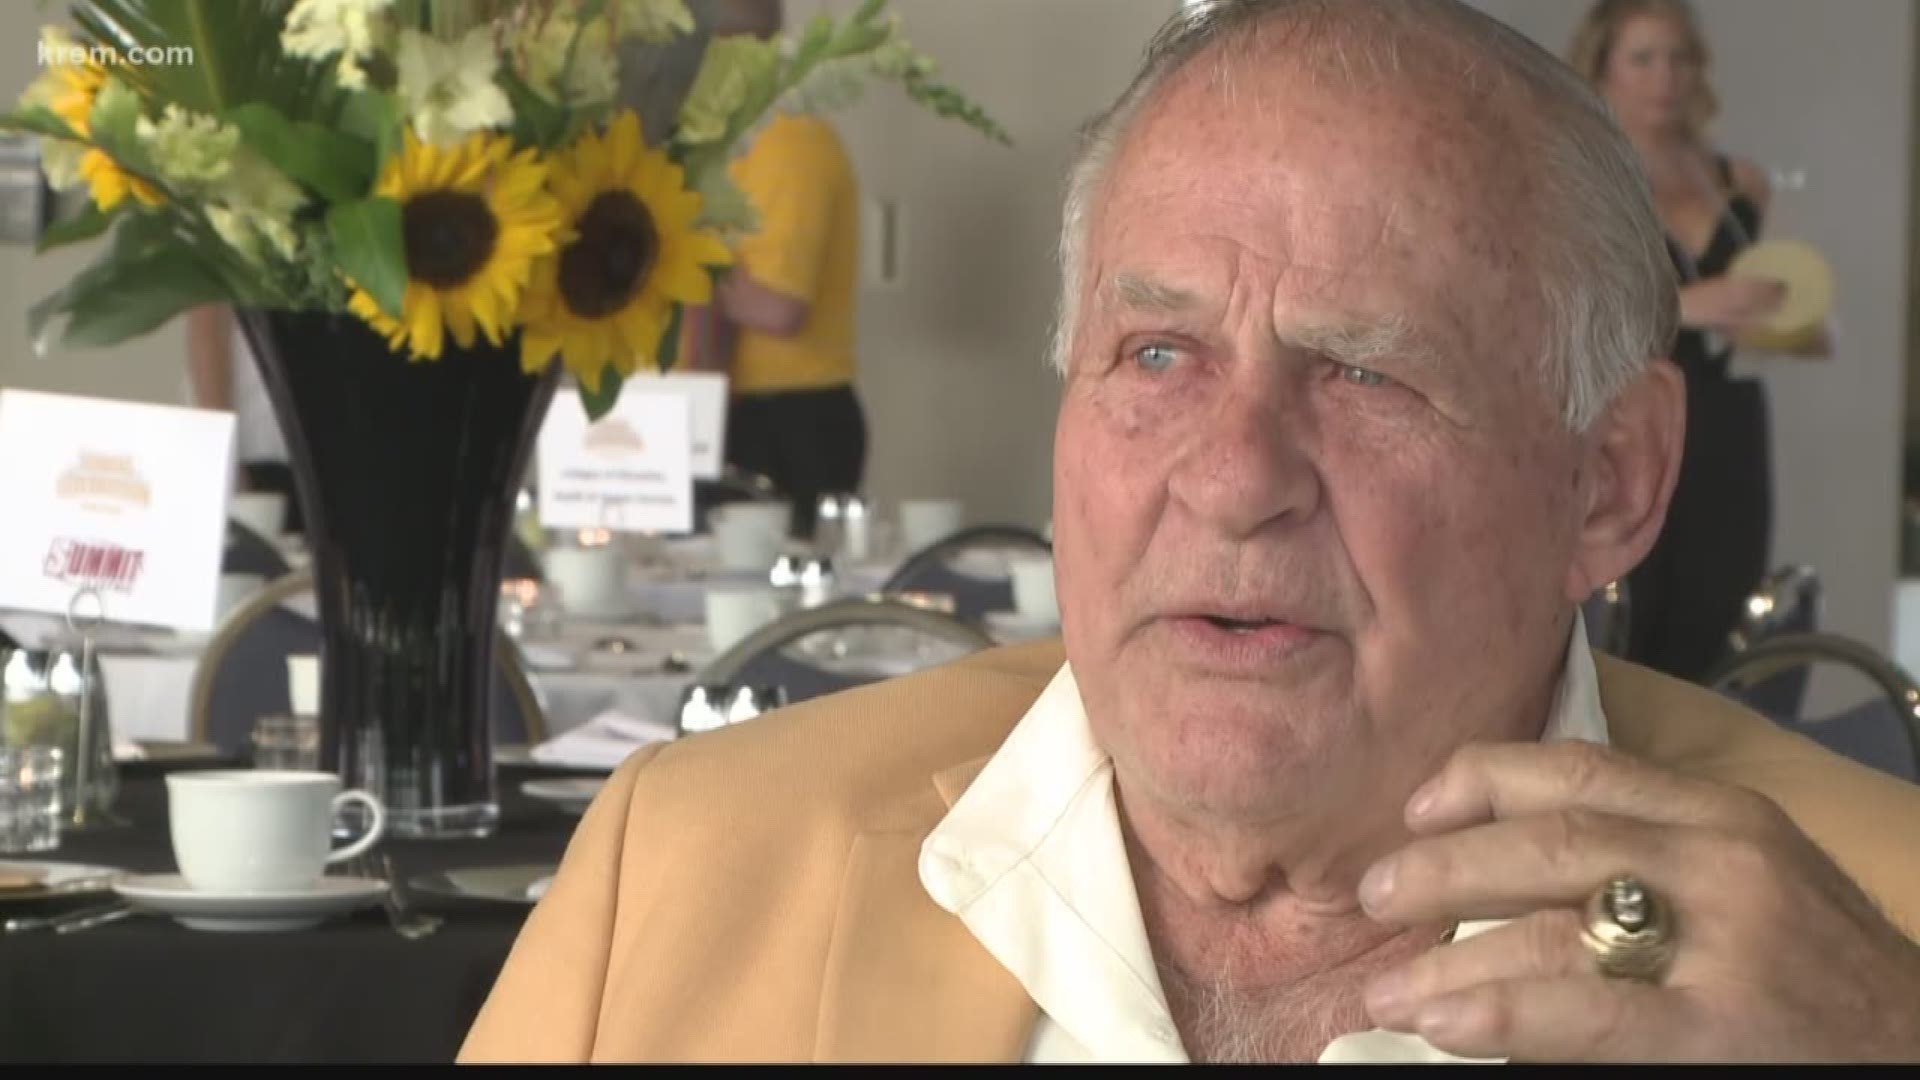 Idaho State Legislature declared Aug. 23, 2018, to be recognized as 'Jerry Kramer Day' throughout the state. This after Kramer was inducted into the Pro Football Hall of Fame last month.